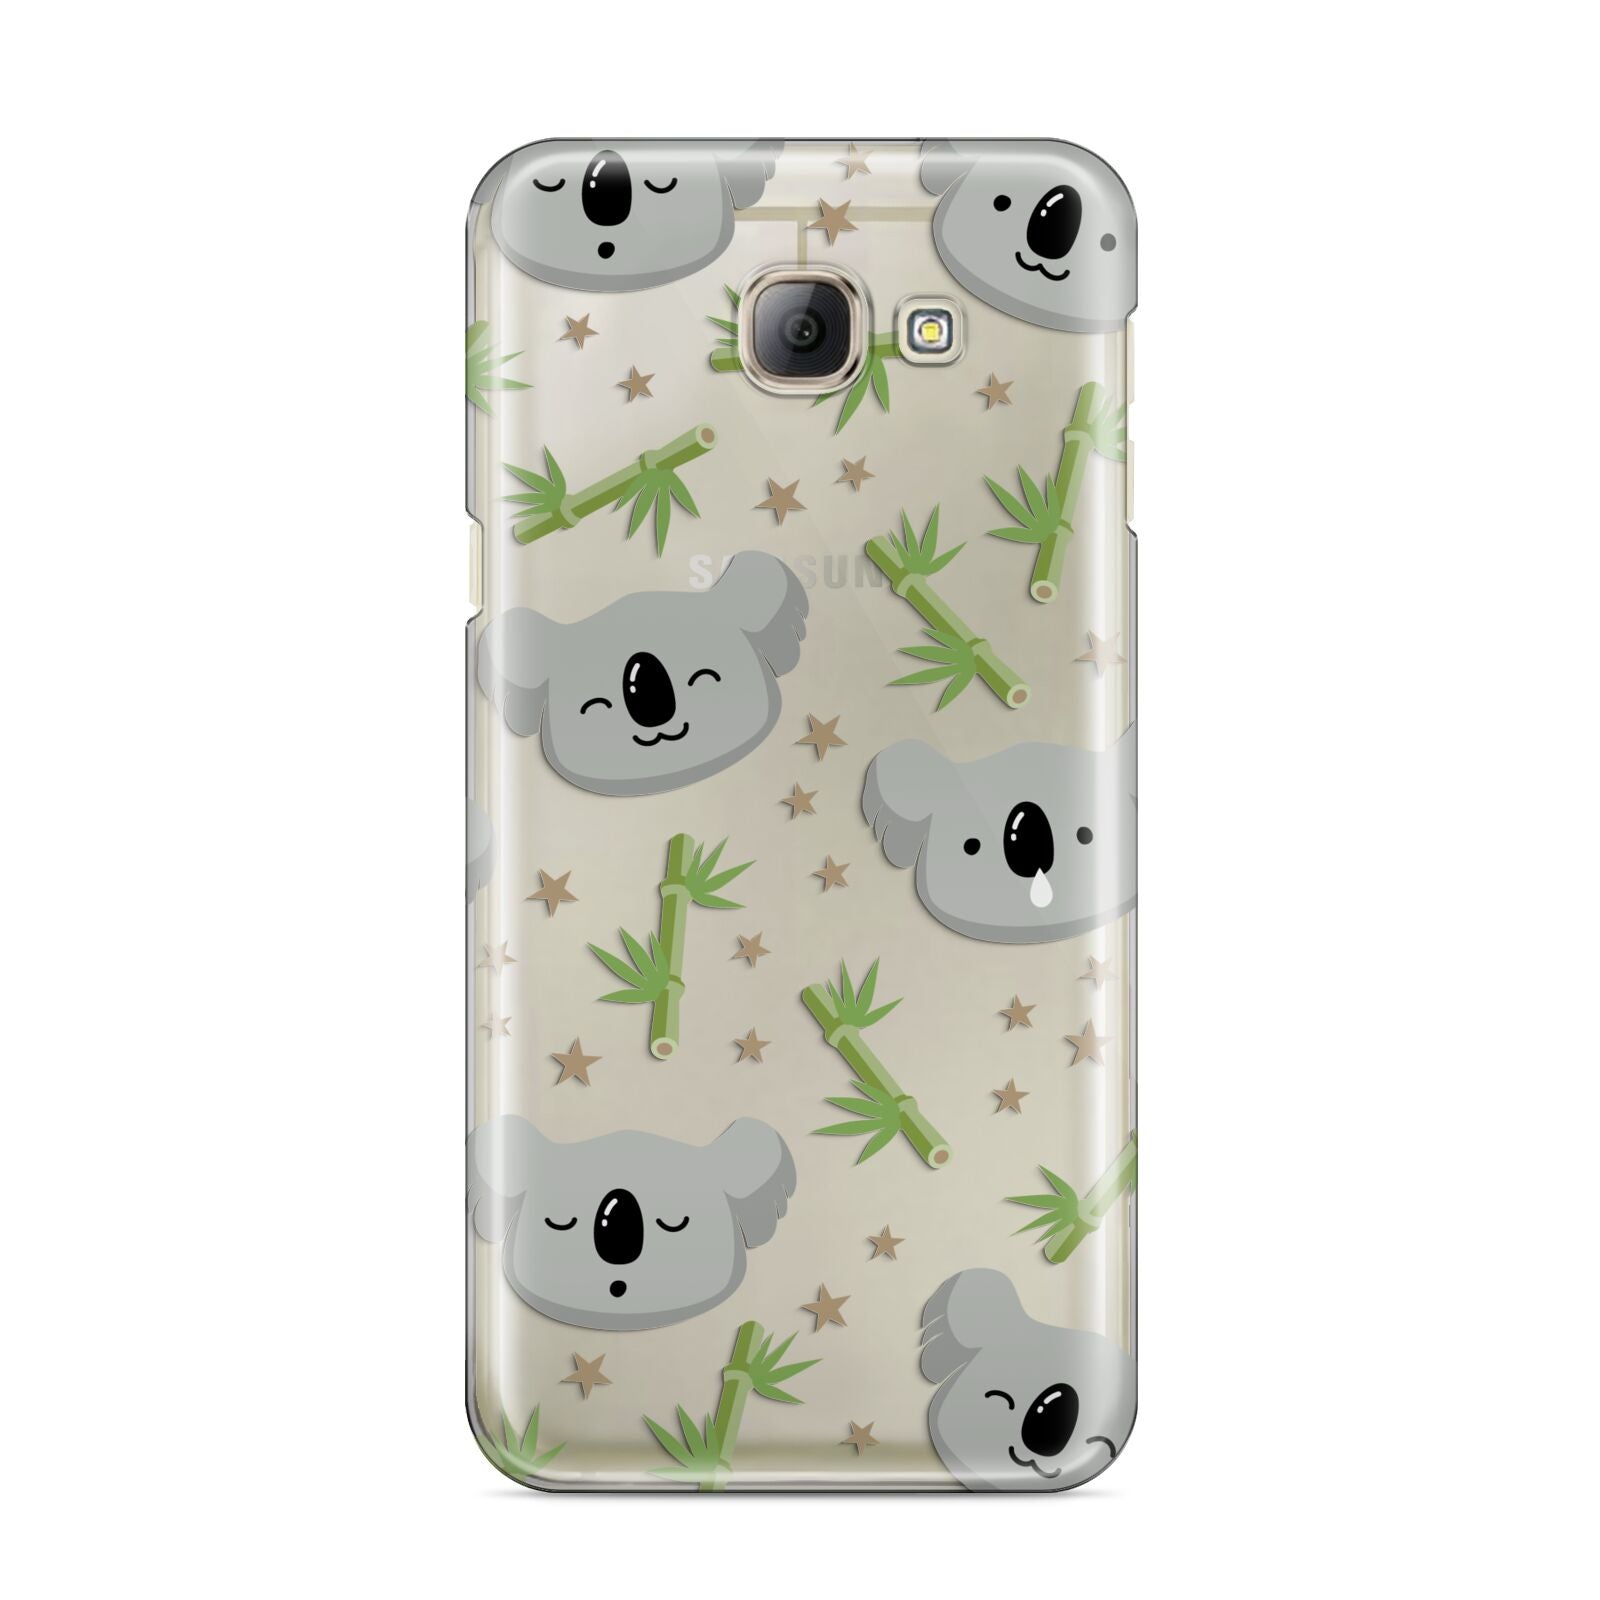 Koala Faces with Transparent Background Samsung Galaxy A8 2016 Case